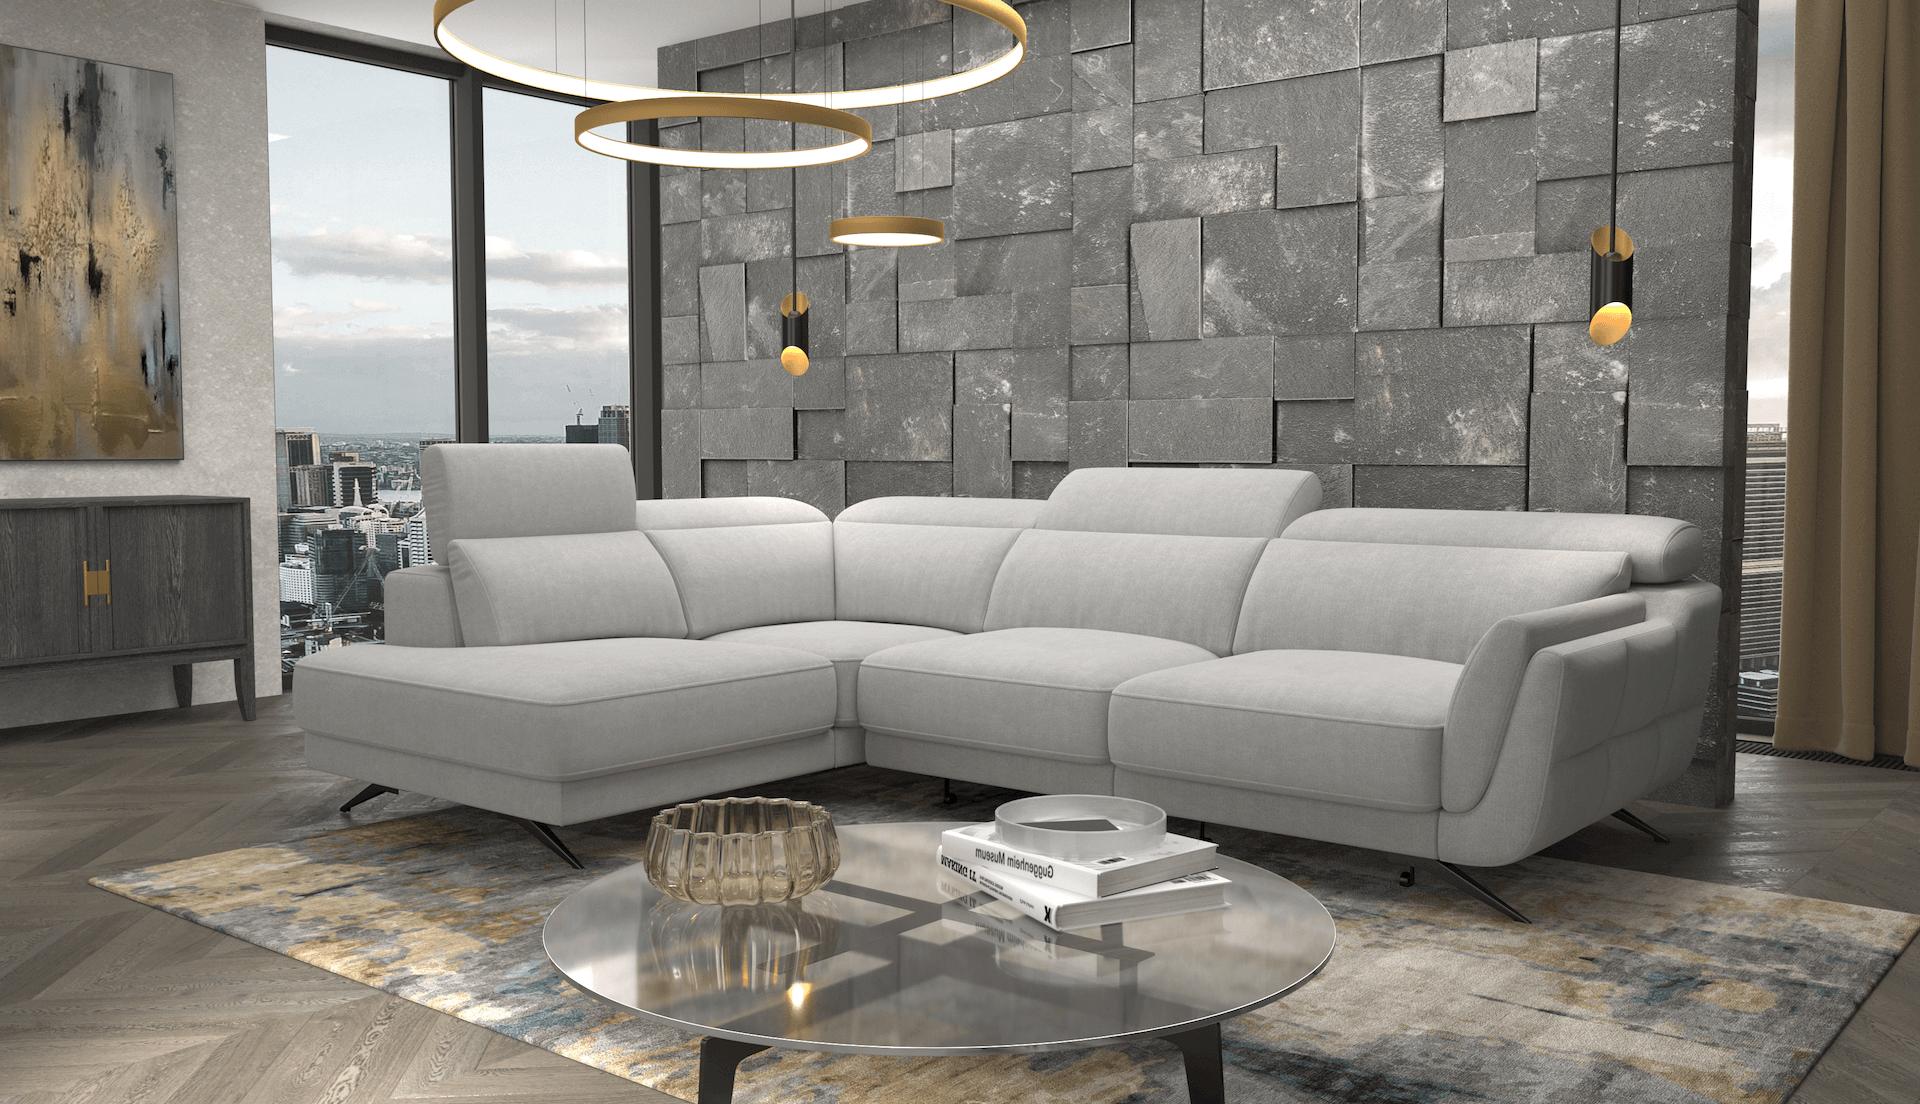 

    
Ronda-Grey-Sectional-Sofa-LC Contemporary Light Grey Wood Sectional Sofa Left Bumper Chaise Modekraft Ronda Ronda-Grey-Sectional-Sofa-LC
